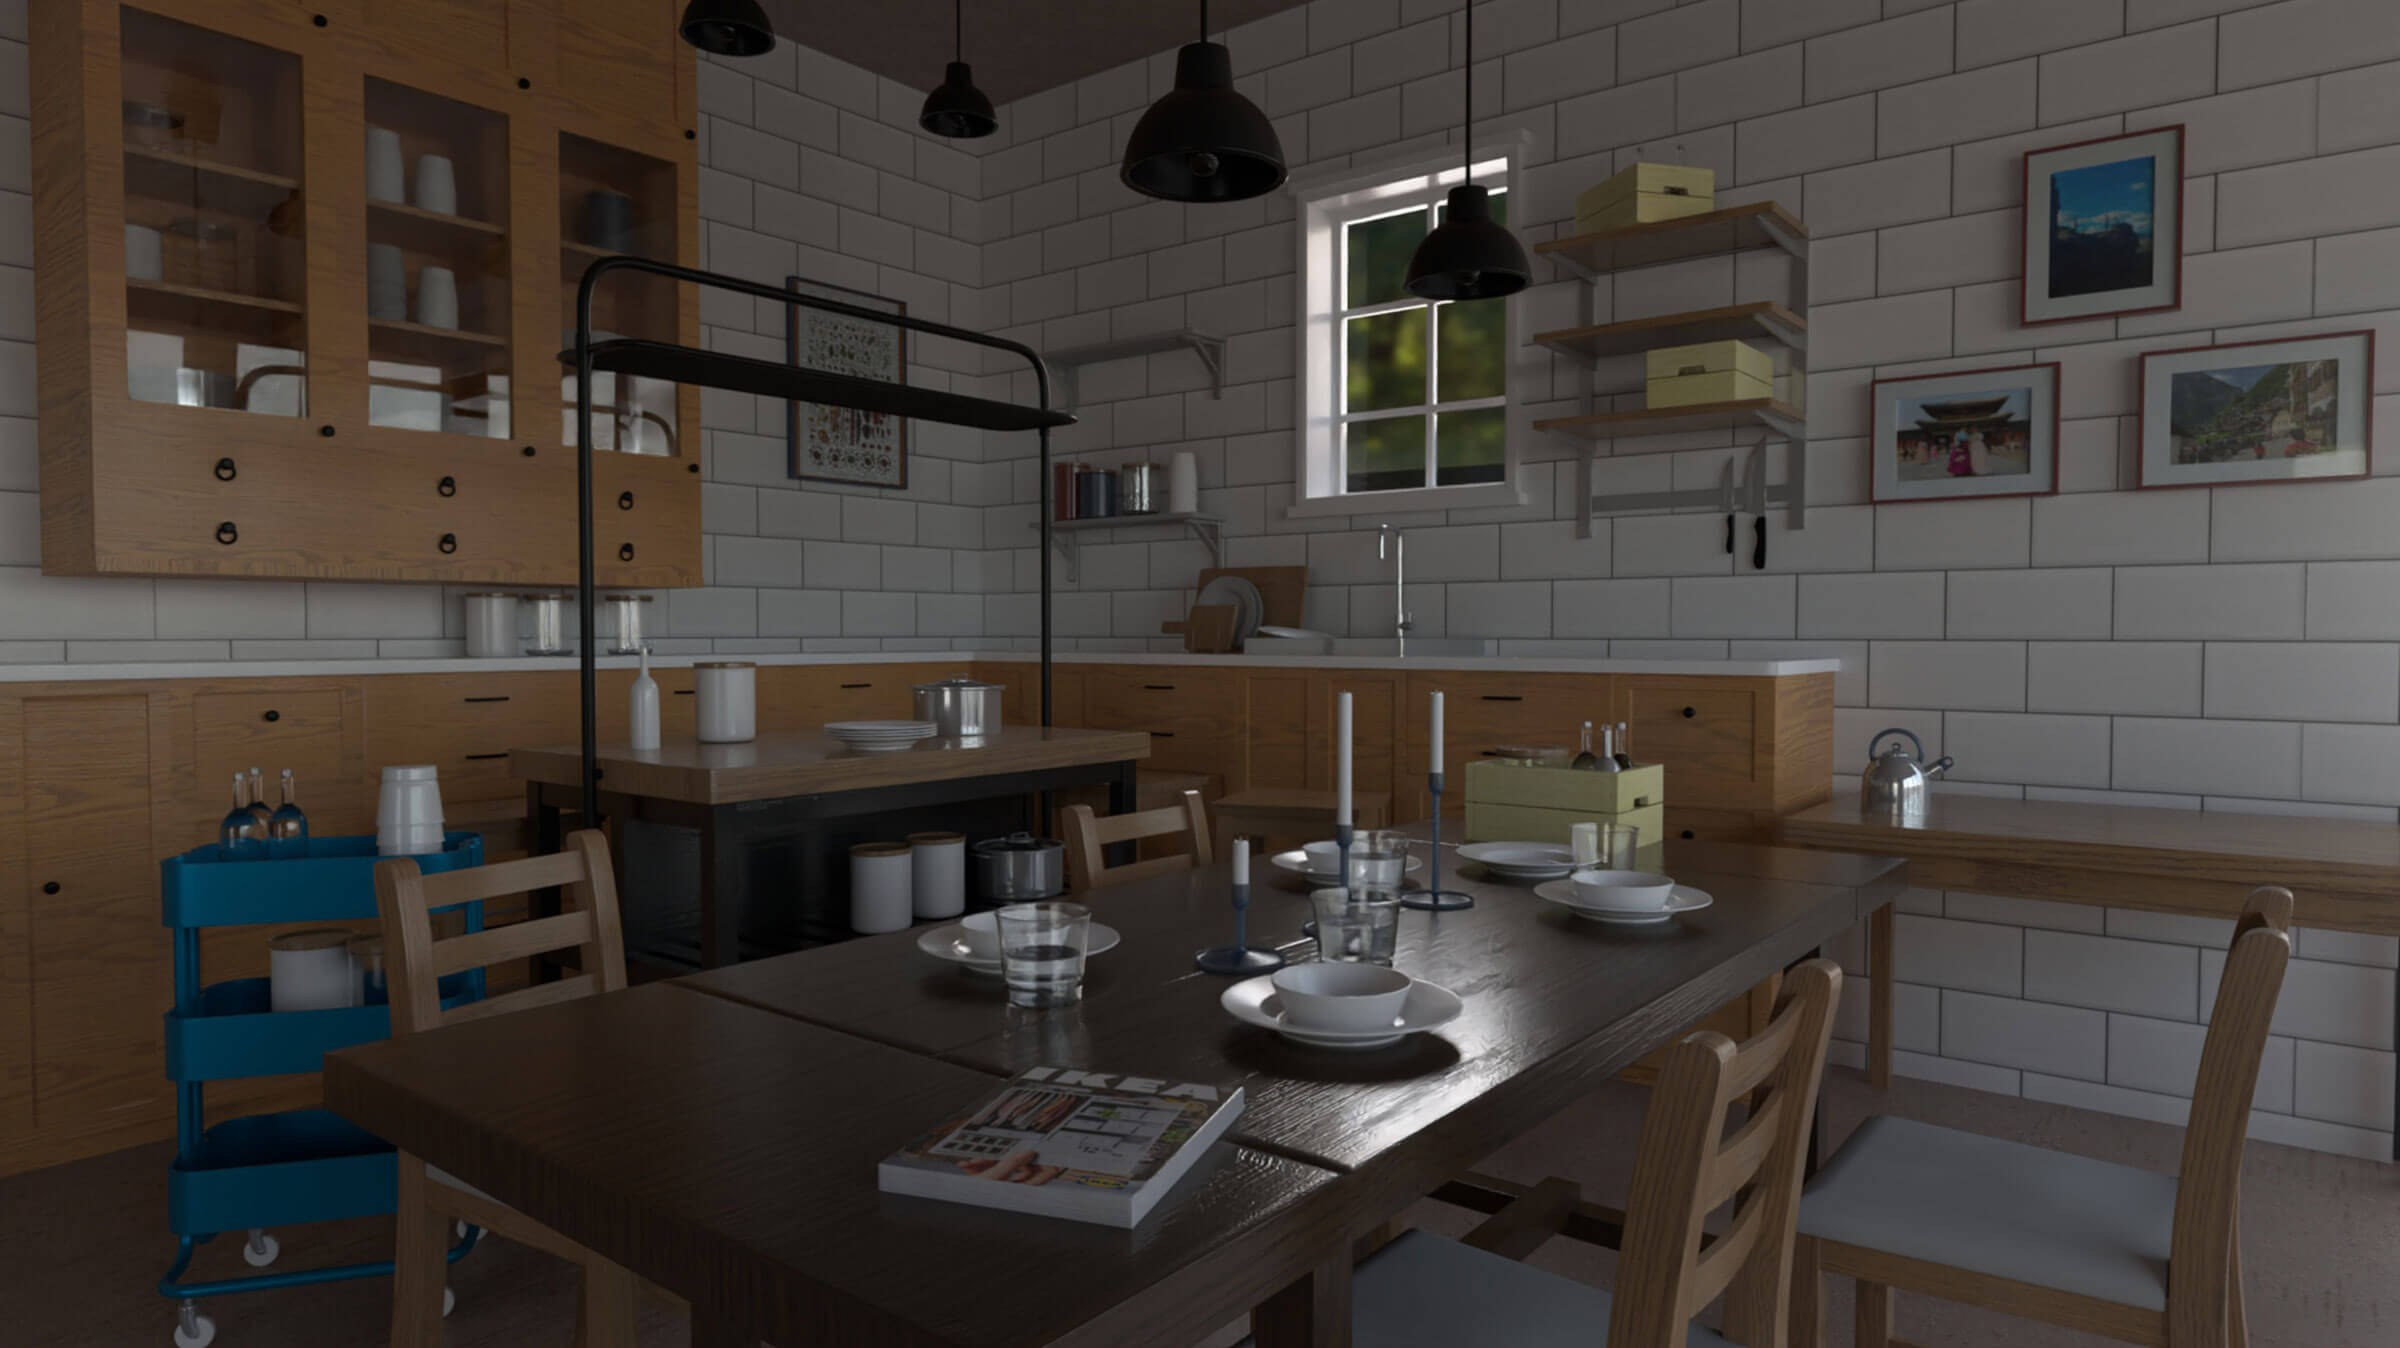 3D-modeled scene of a corner of a kitchen with a dining area in the foreground.